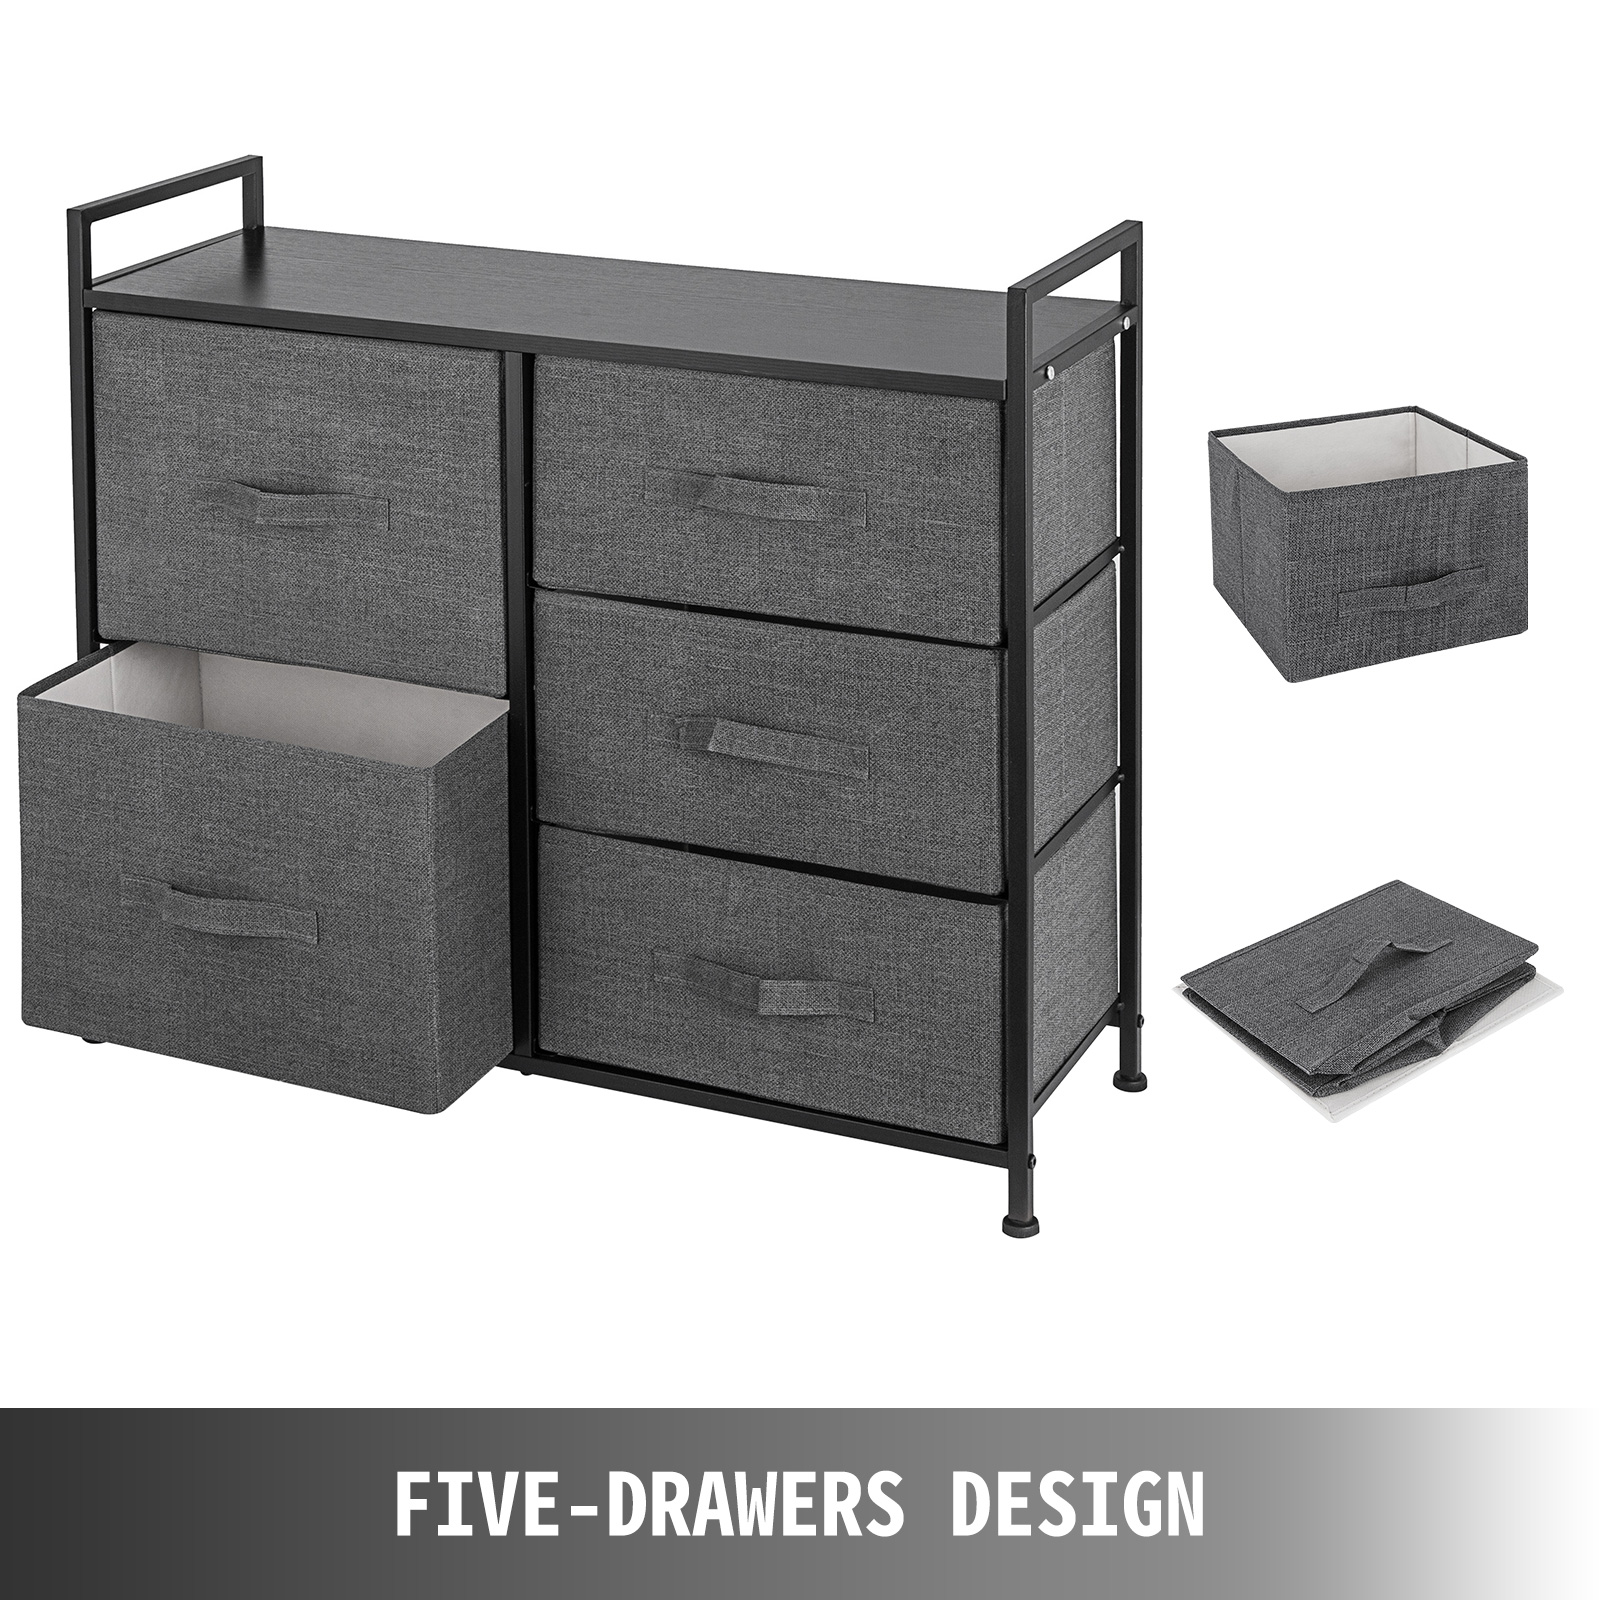 Mdesign Tall Drawer Organizer Storage Tower With 5 Drawers, Light